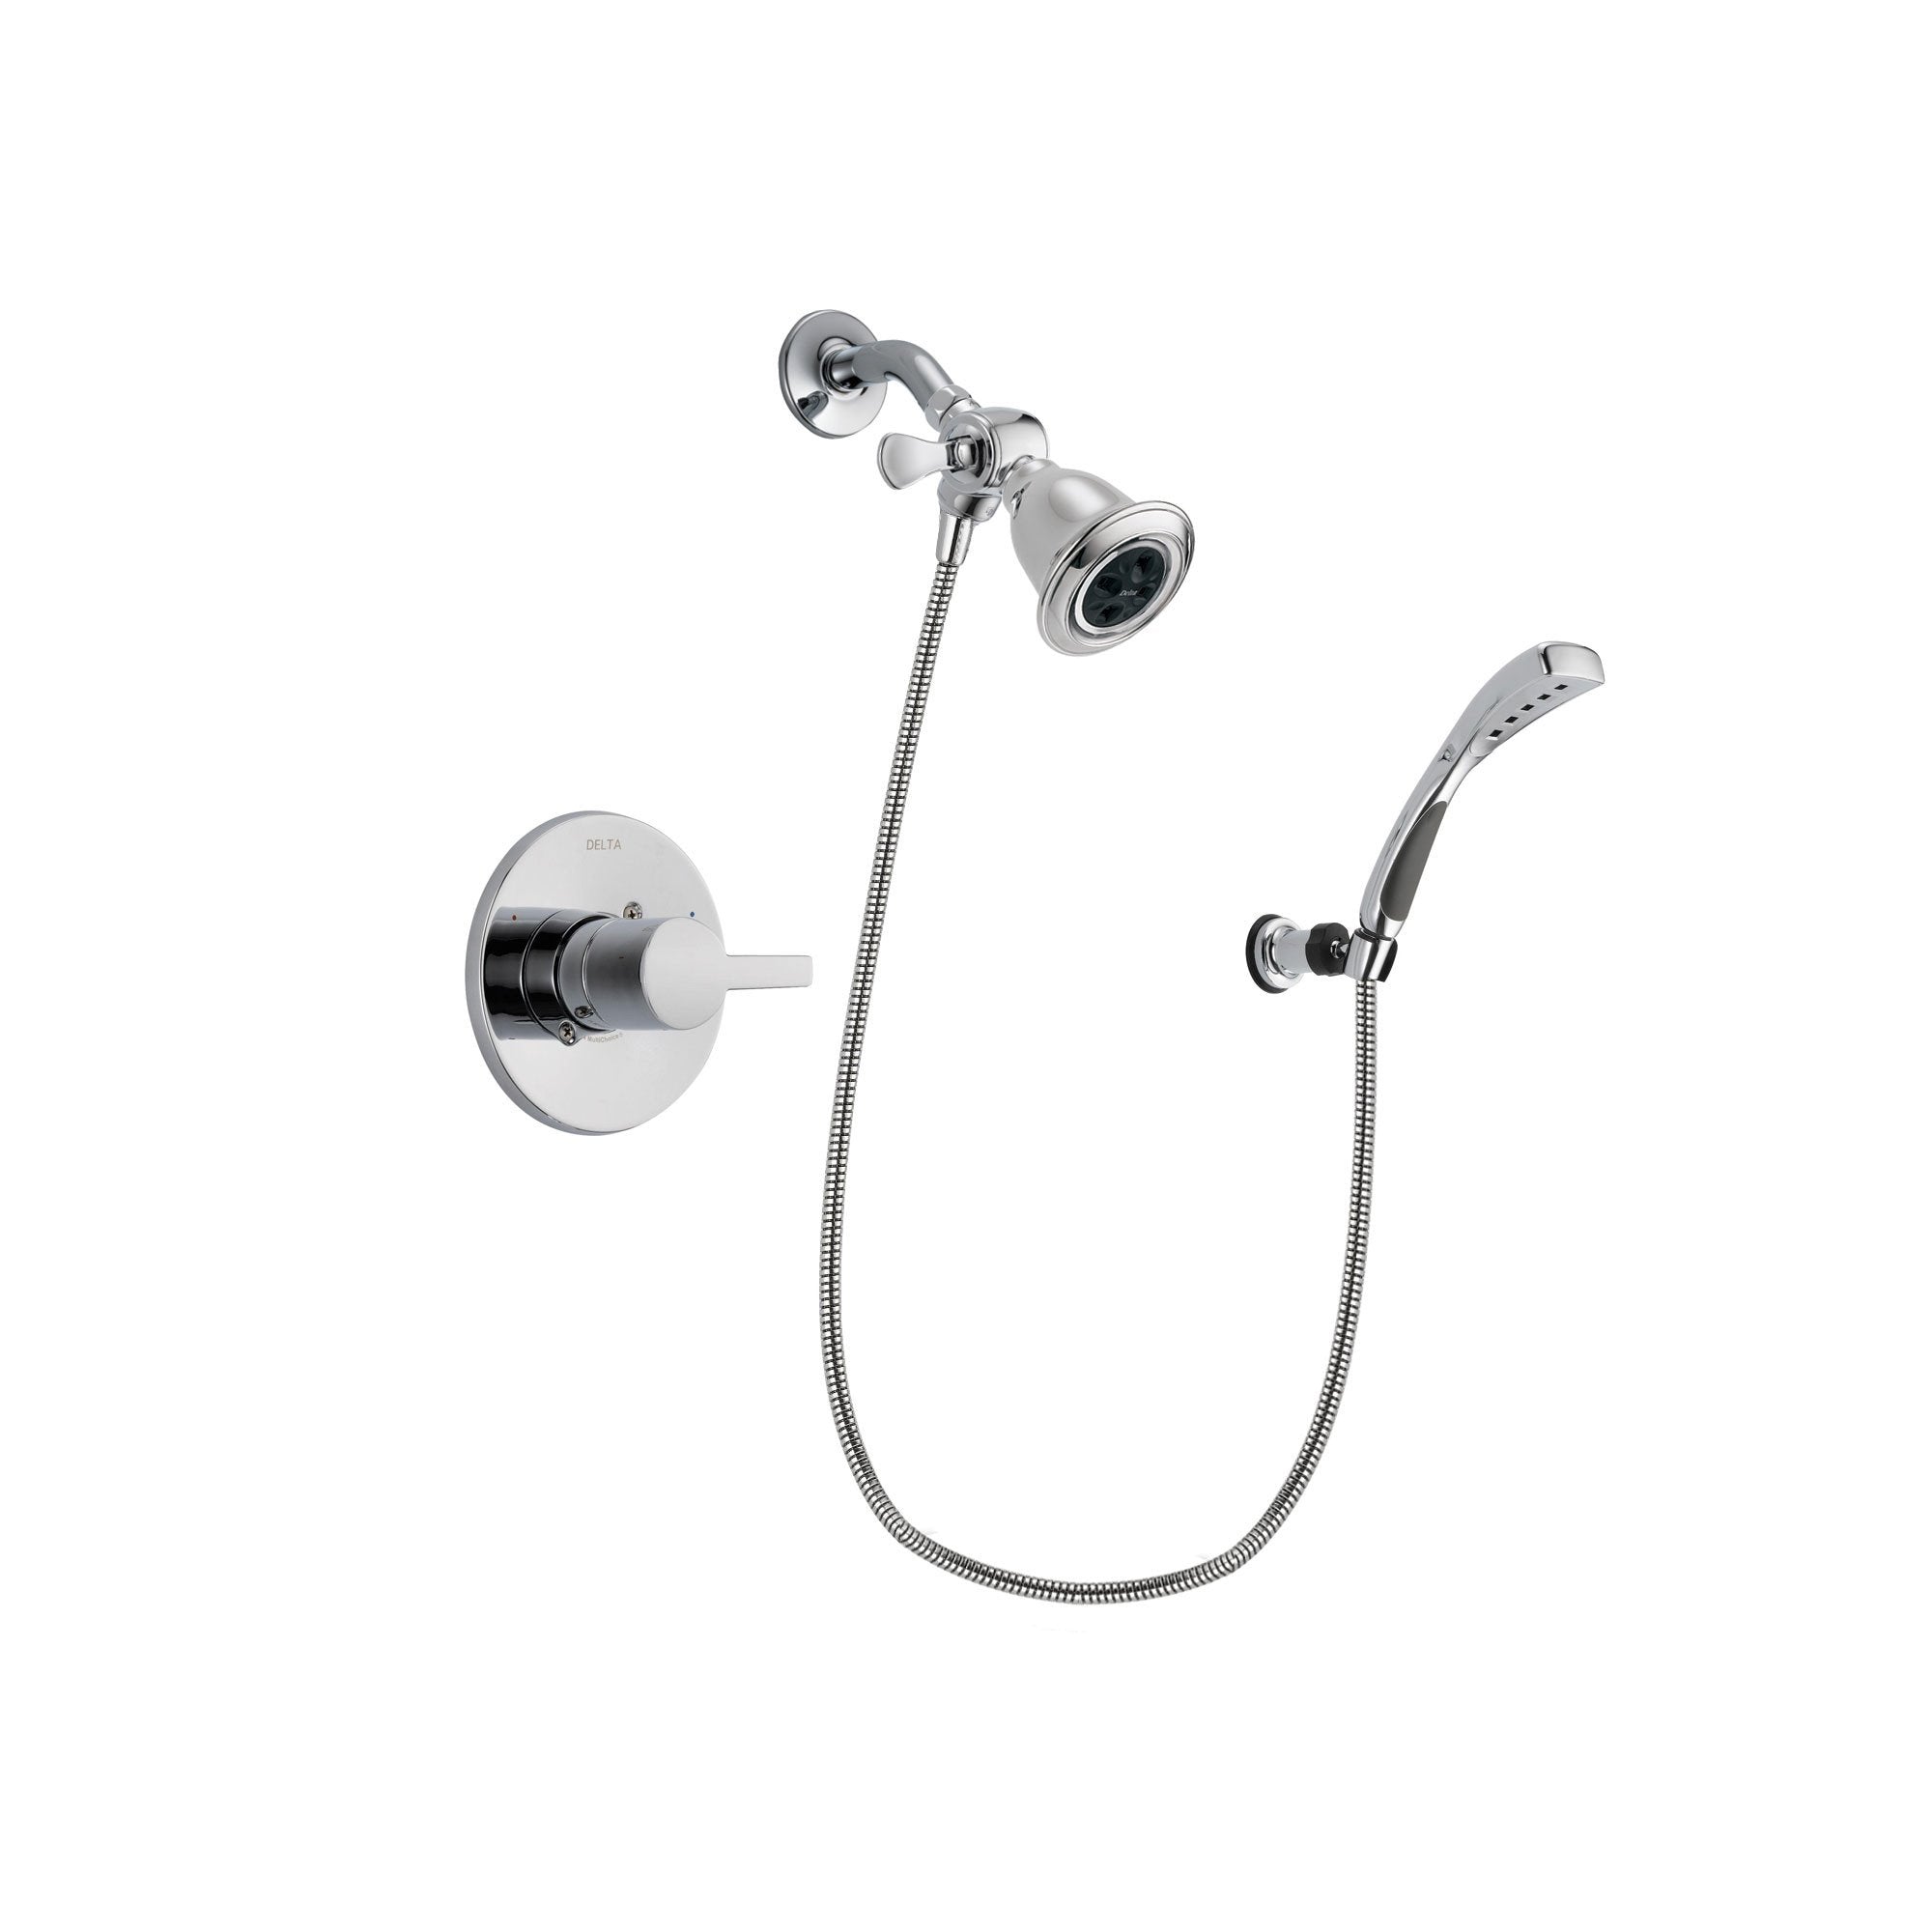 Delta Compel Chrome Finish Shower Faucet System Package with Water Efficient Showerhead and Wall-Mount Bracket with Handheld Shower Spray Includes Rough-in Valve DSP1018V